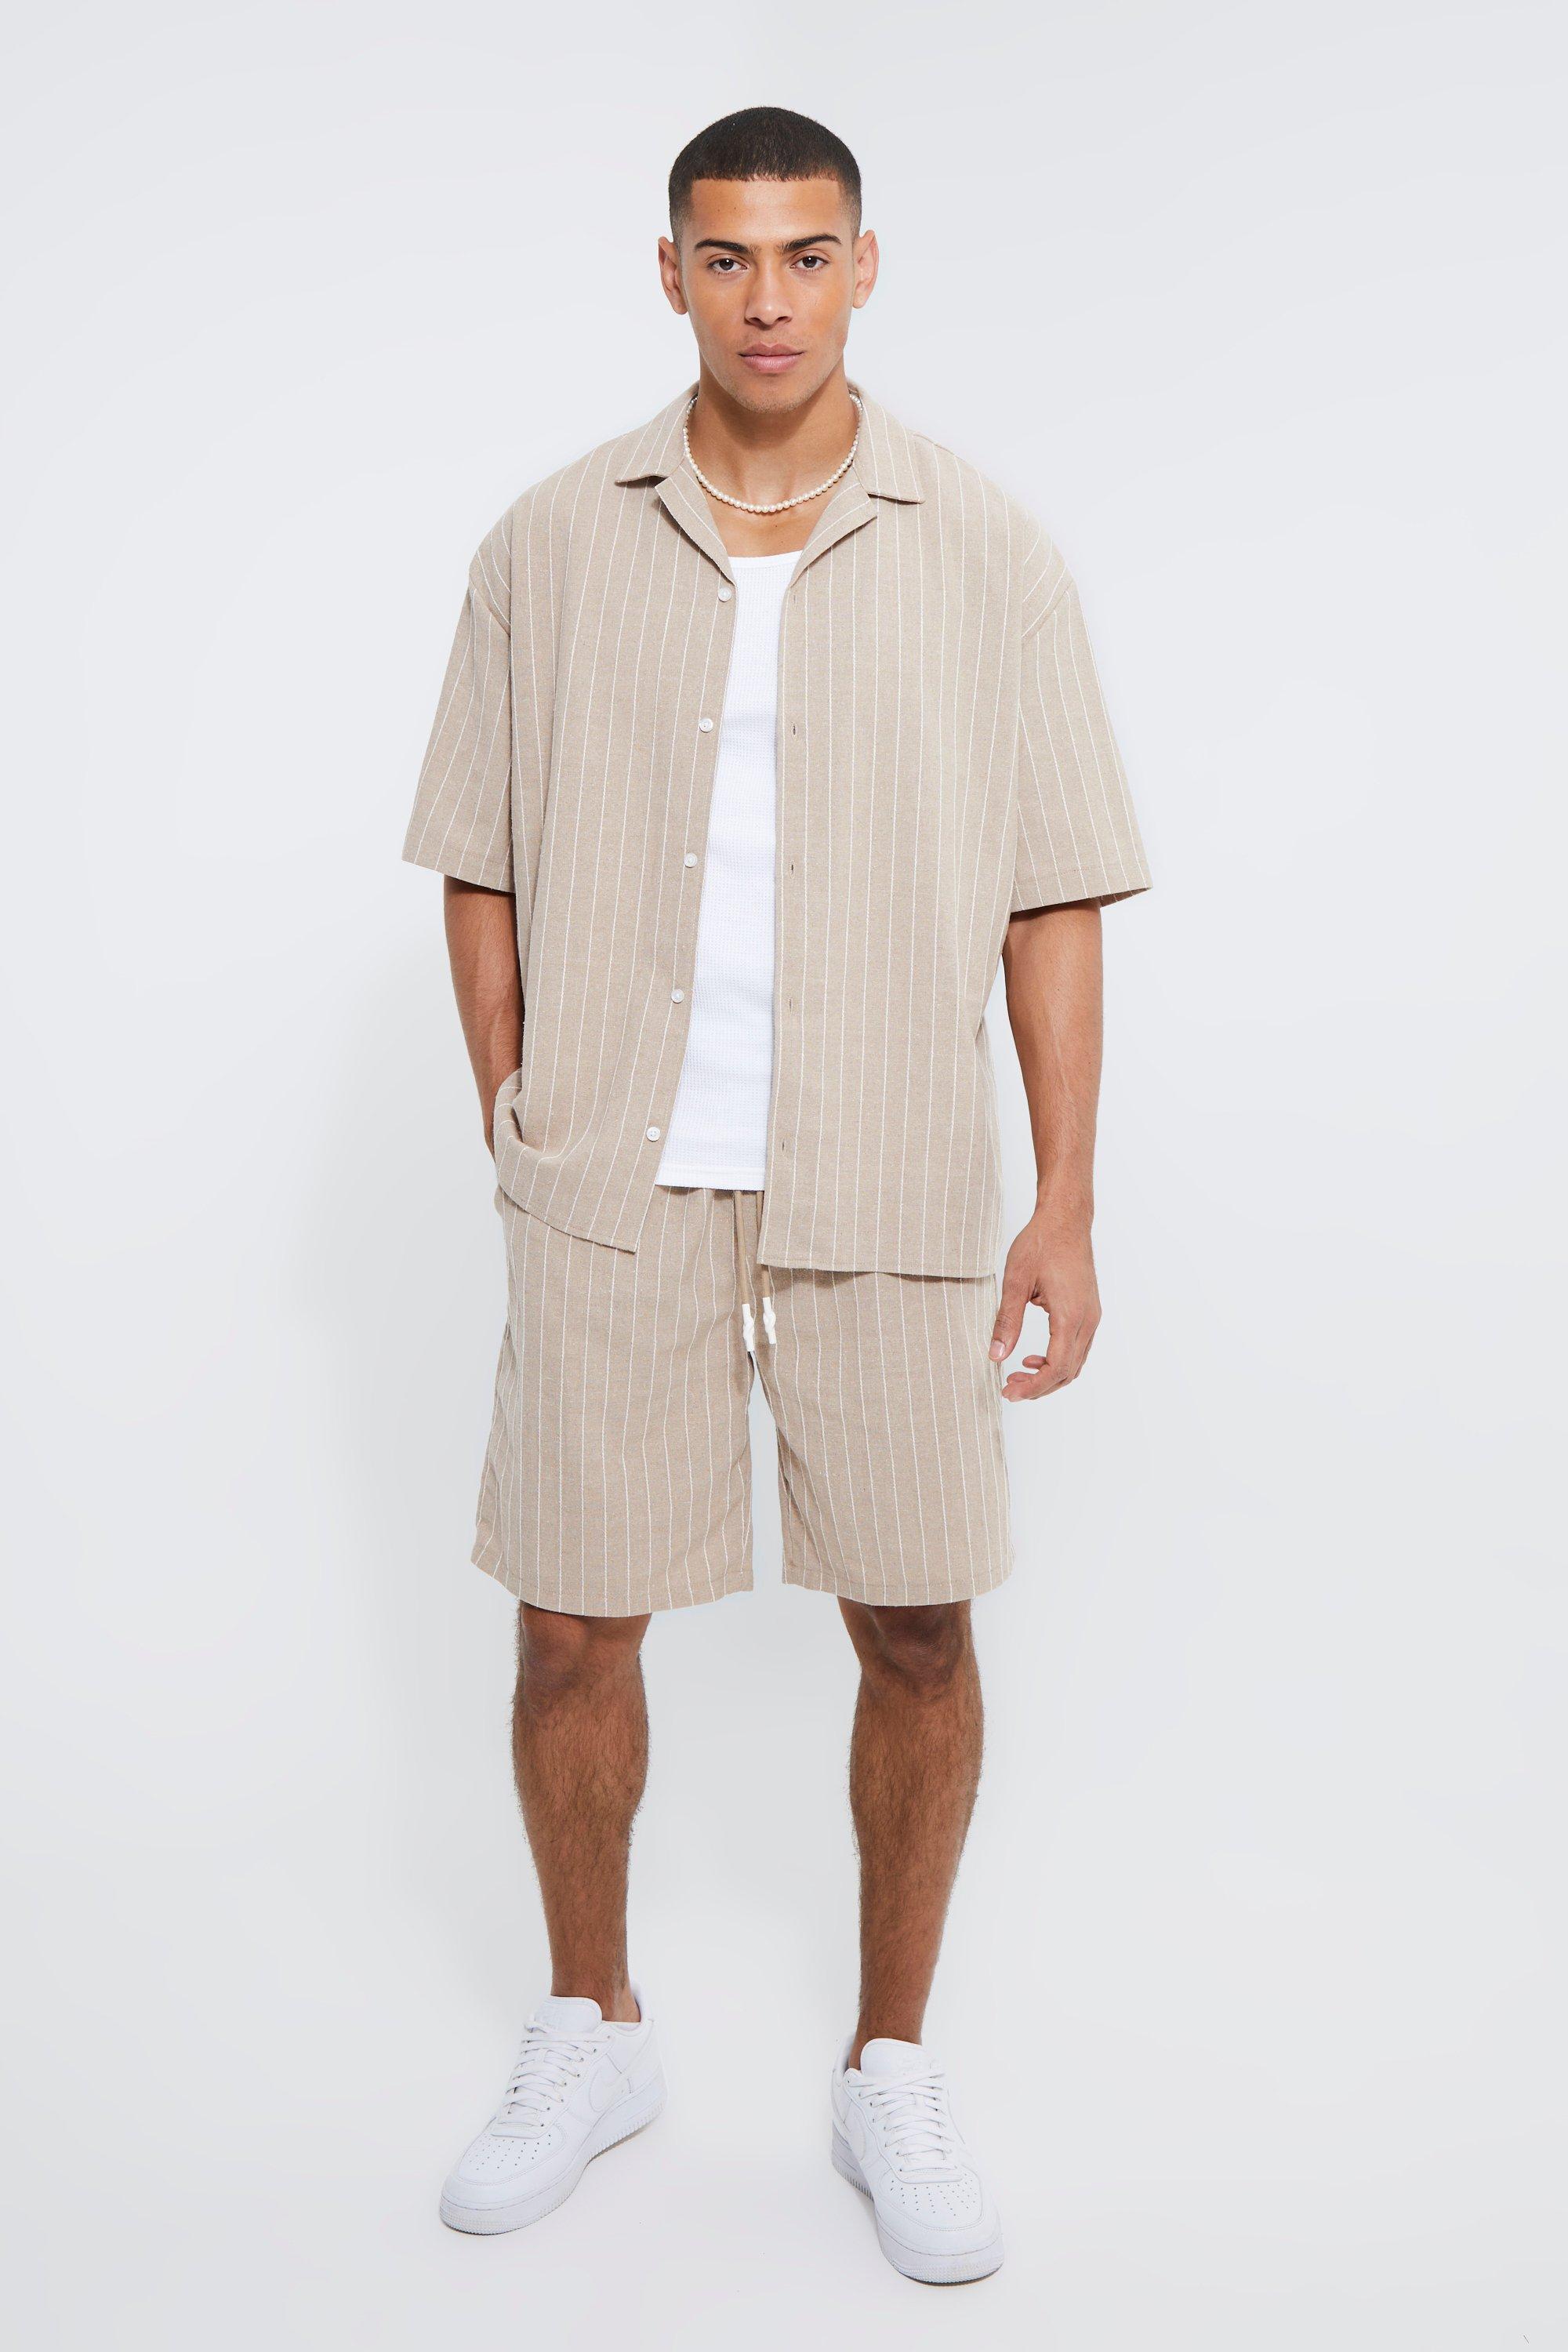 BoohooMAN Toosii Boxy Oversized Texture Stripe Shirt And Short in ...